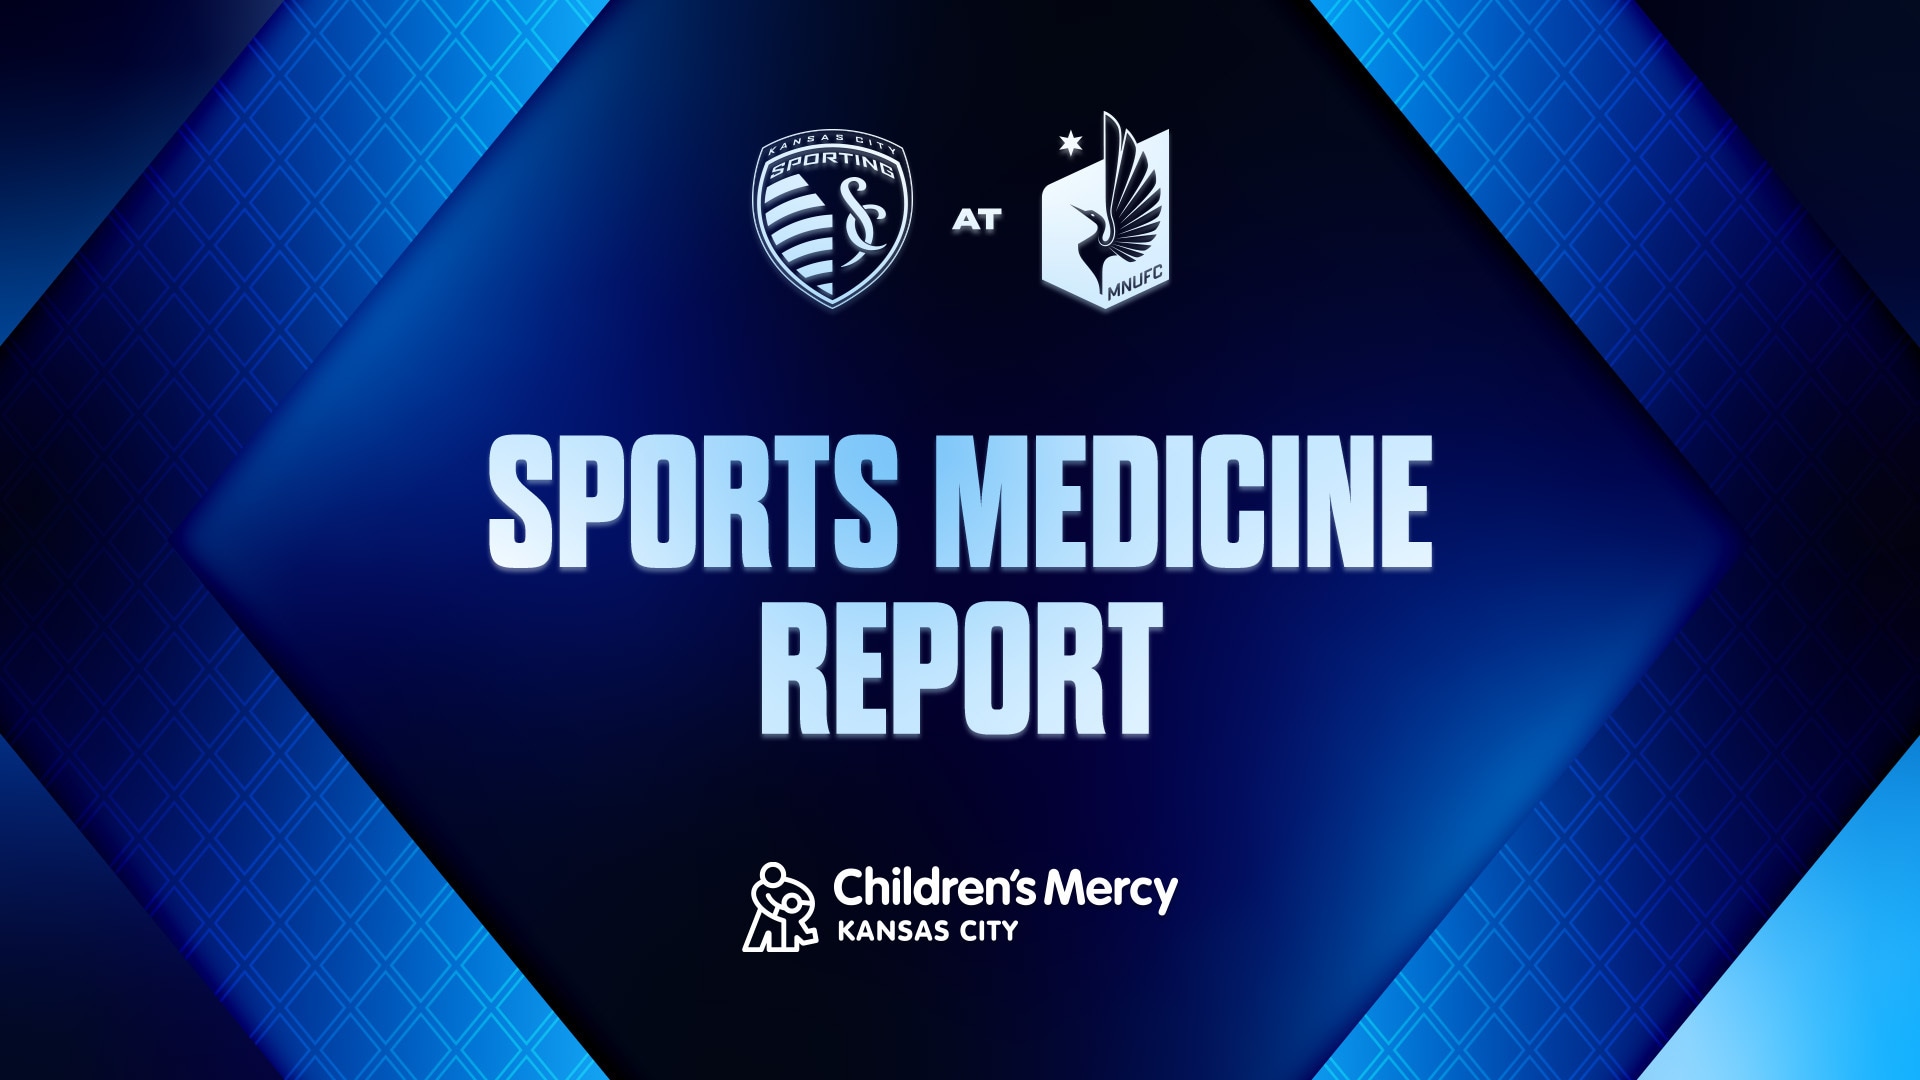 SportingKC.com’s Sports Medicine Report: Updates on Injuries and Suspensions Ahead of Minnesota United FC Match